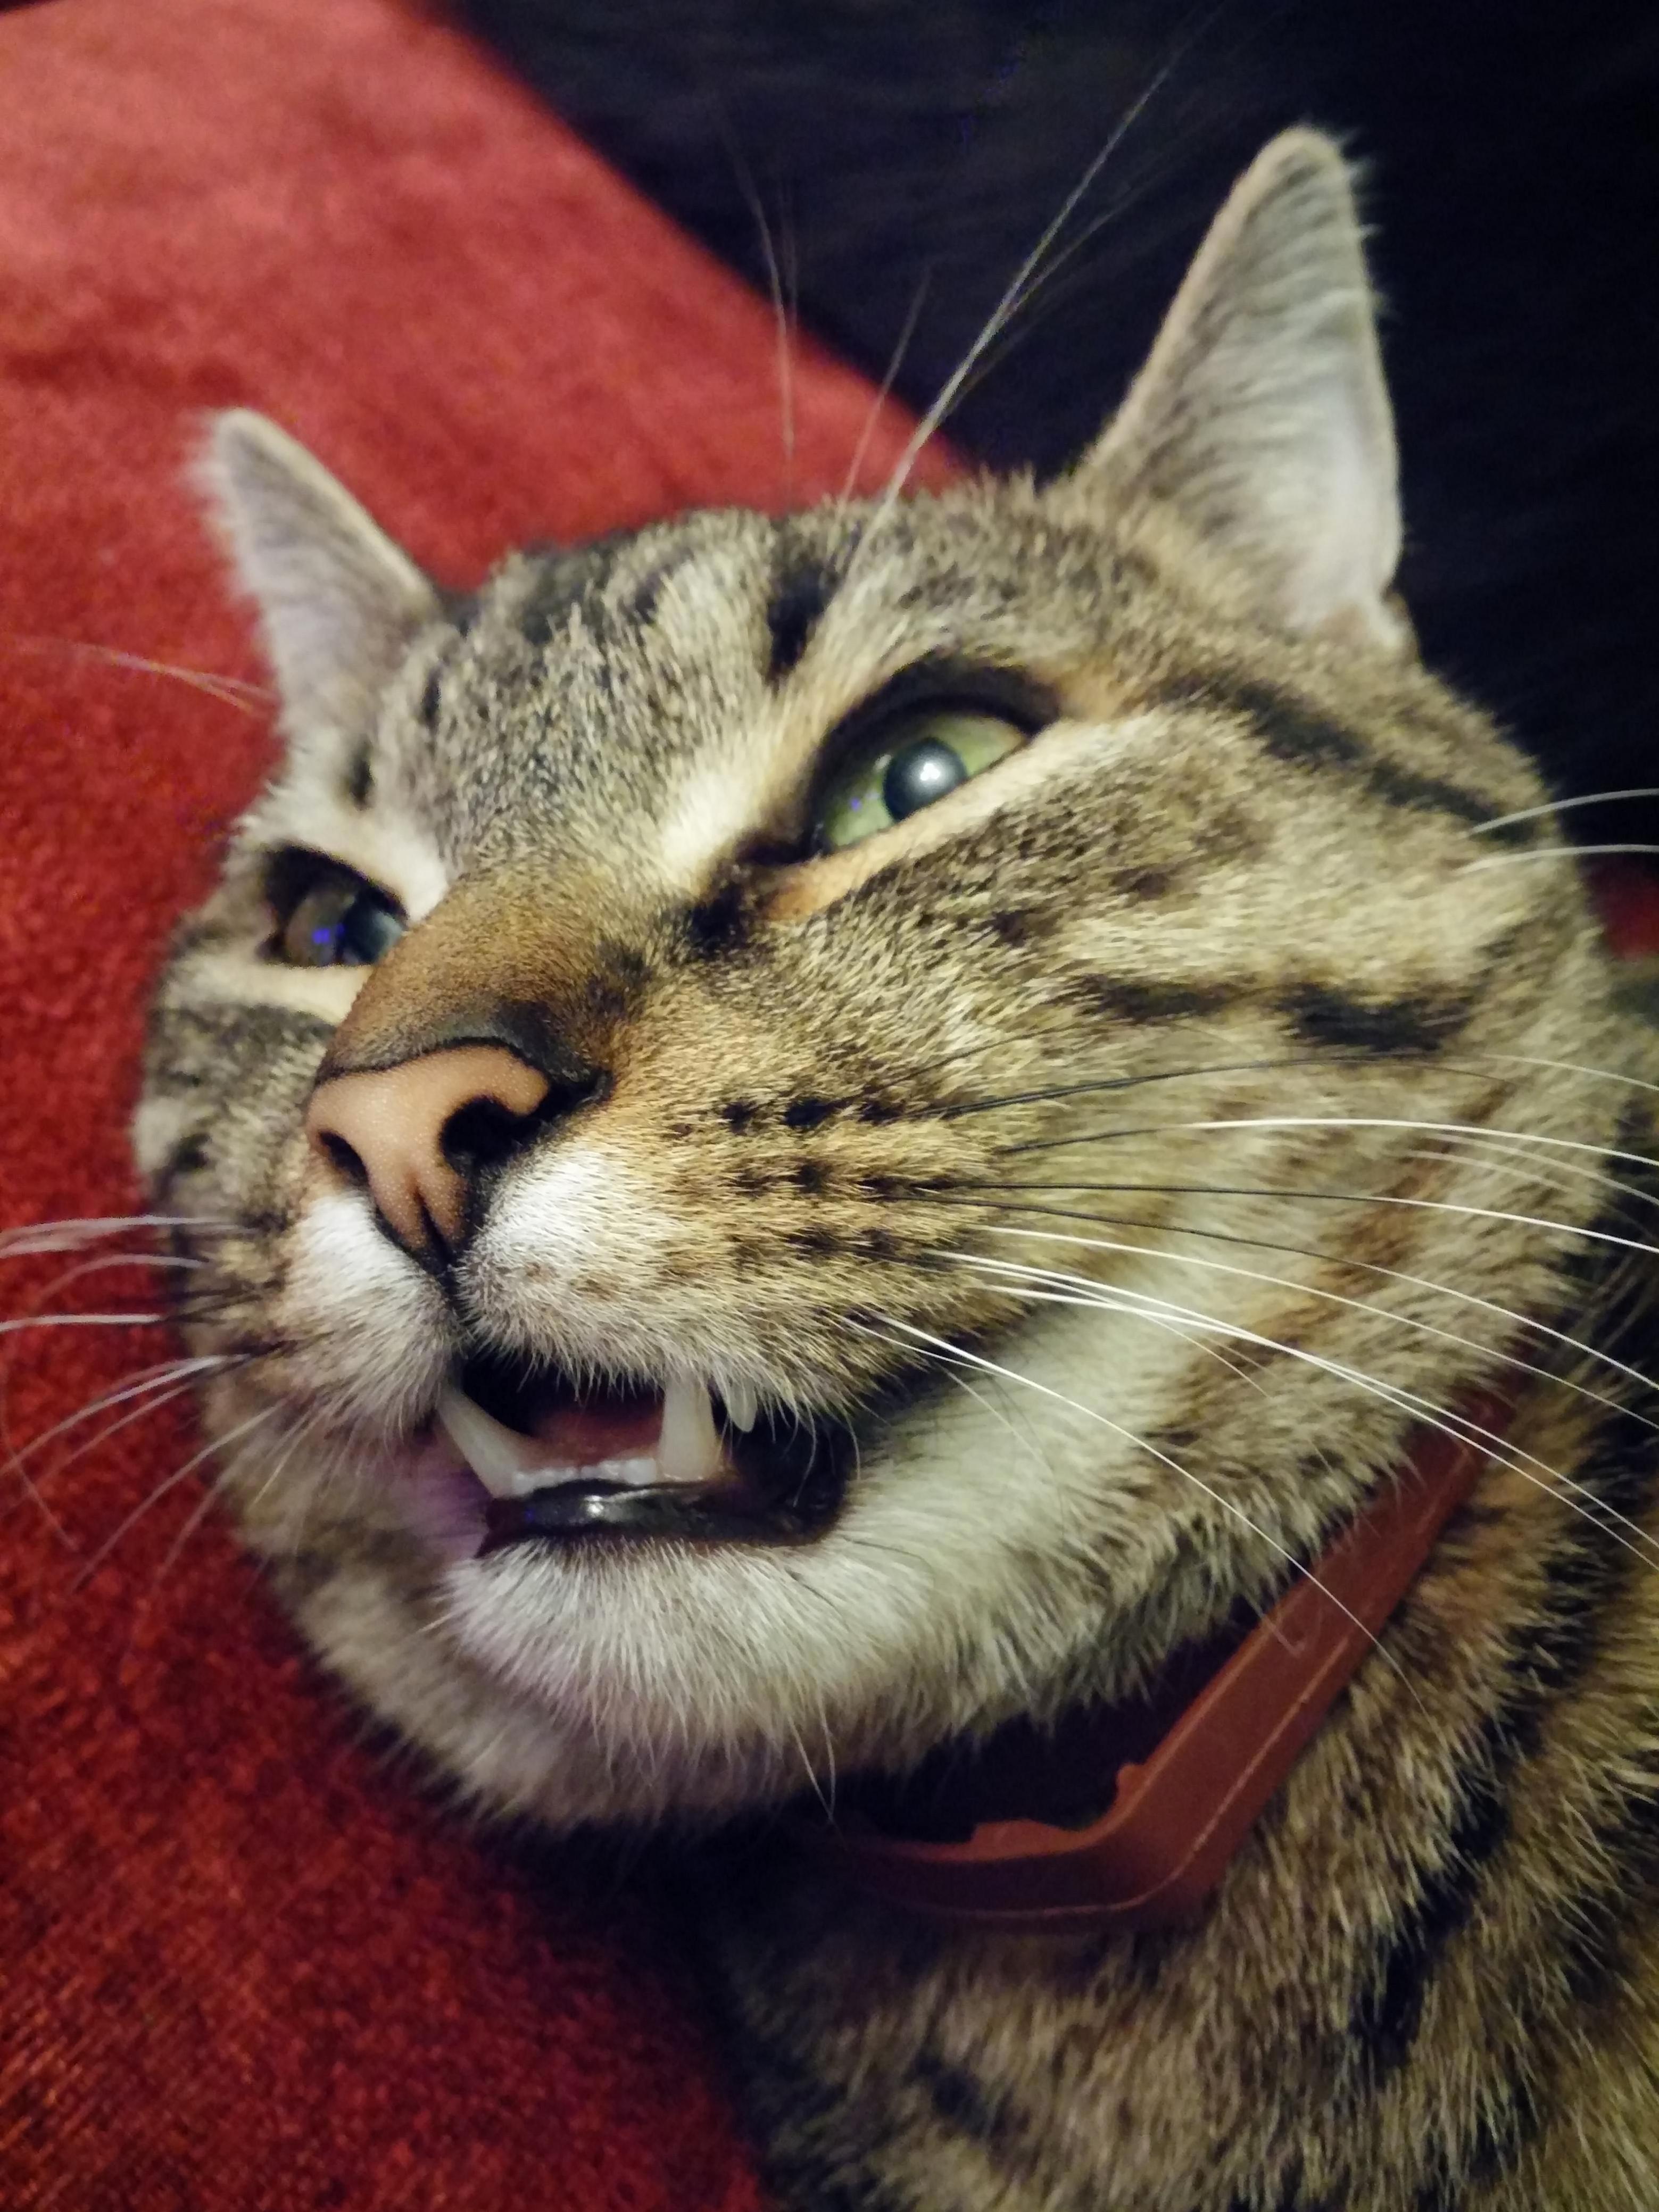 Does your cat ever forget to close their mouth